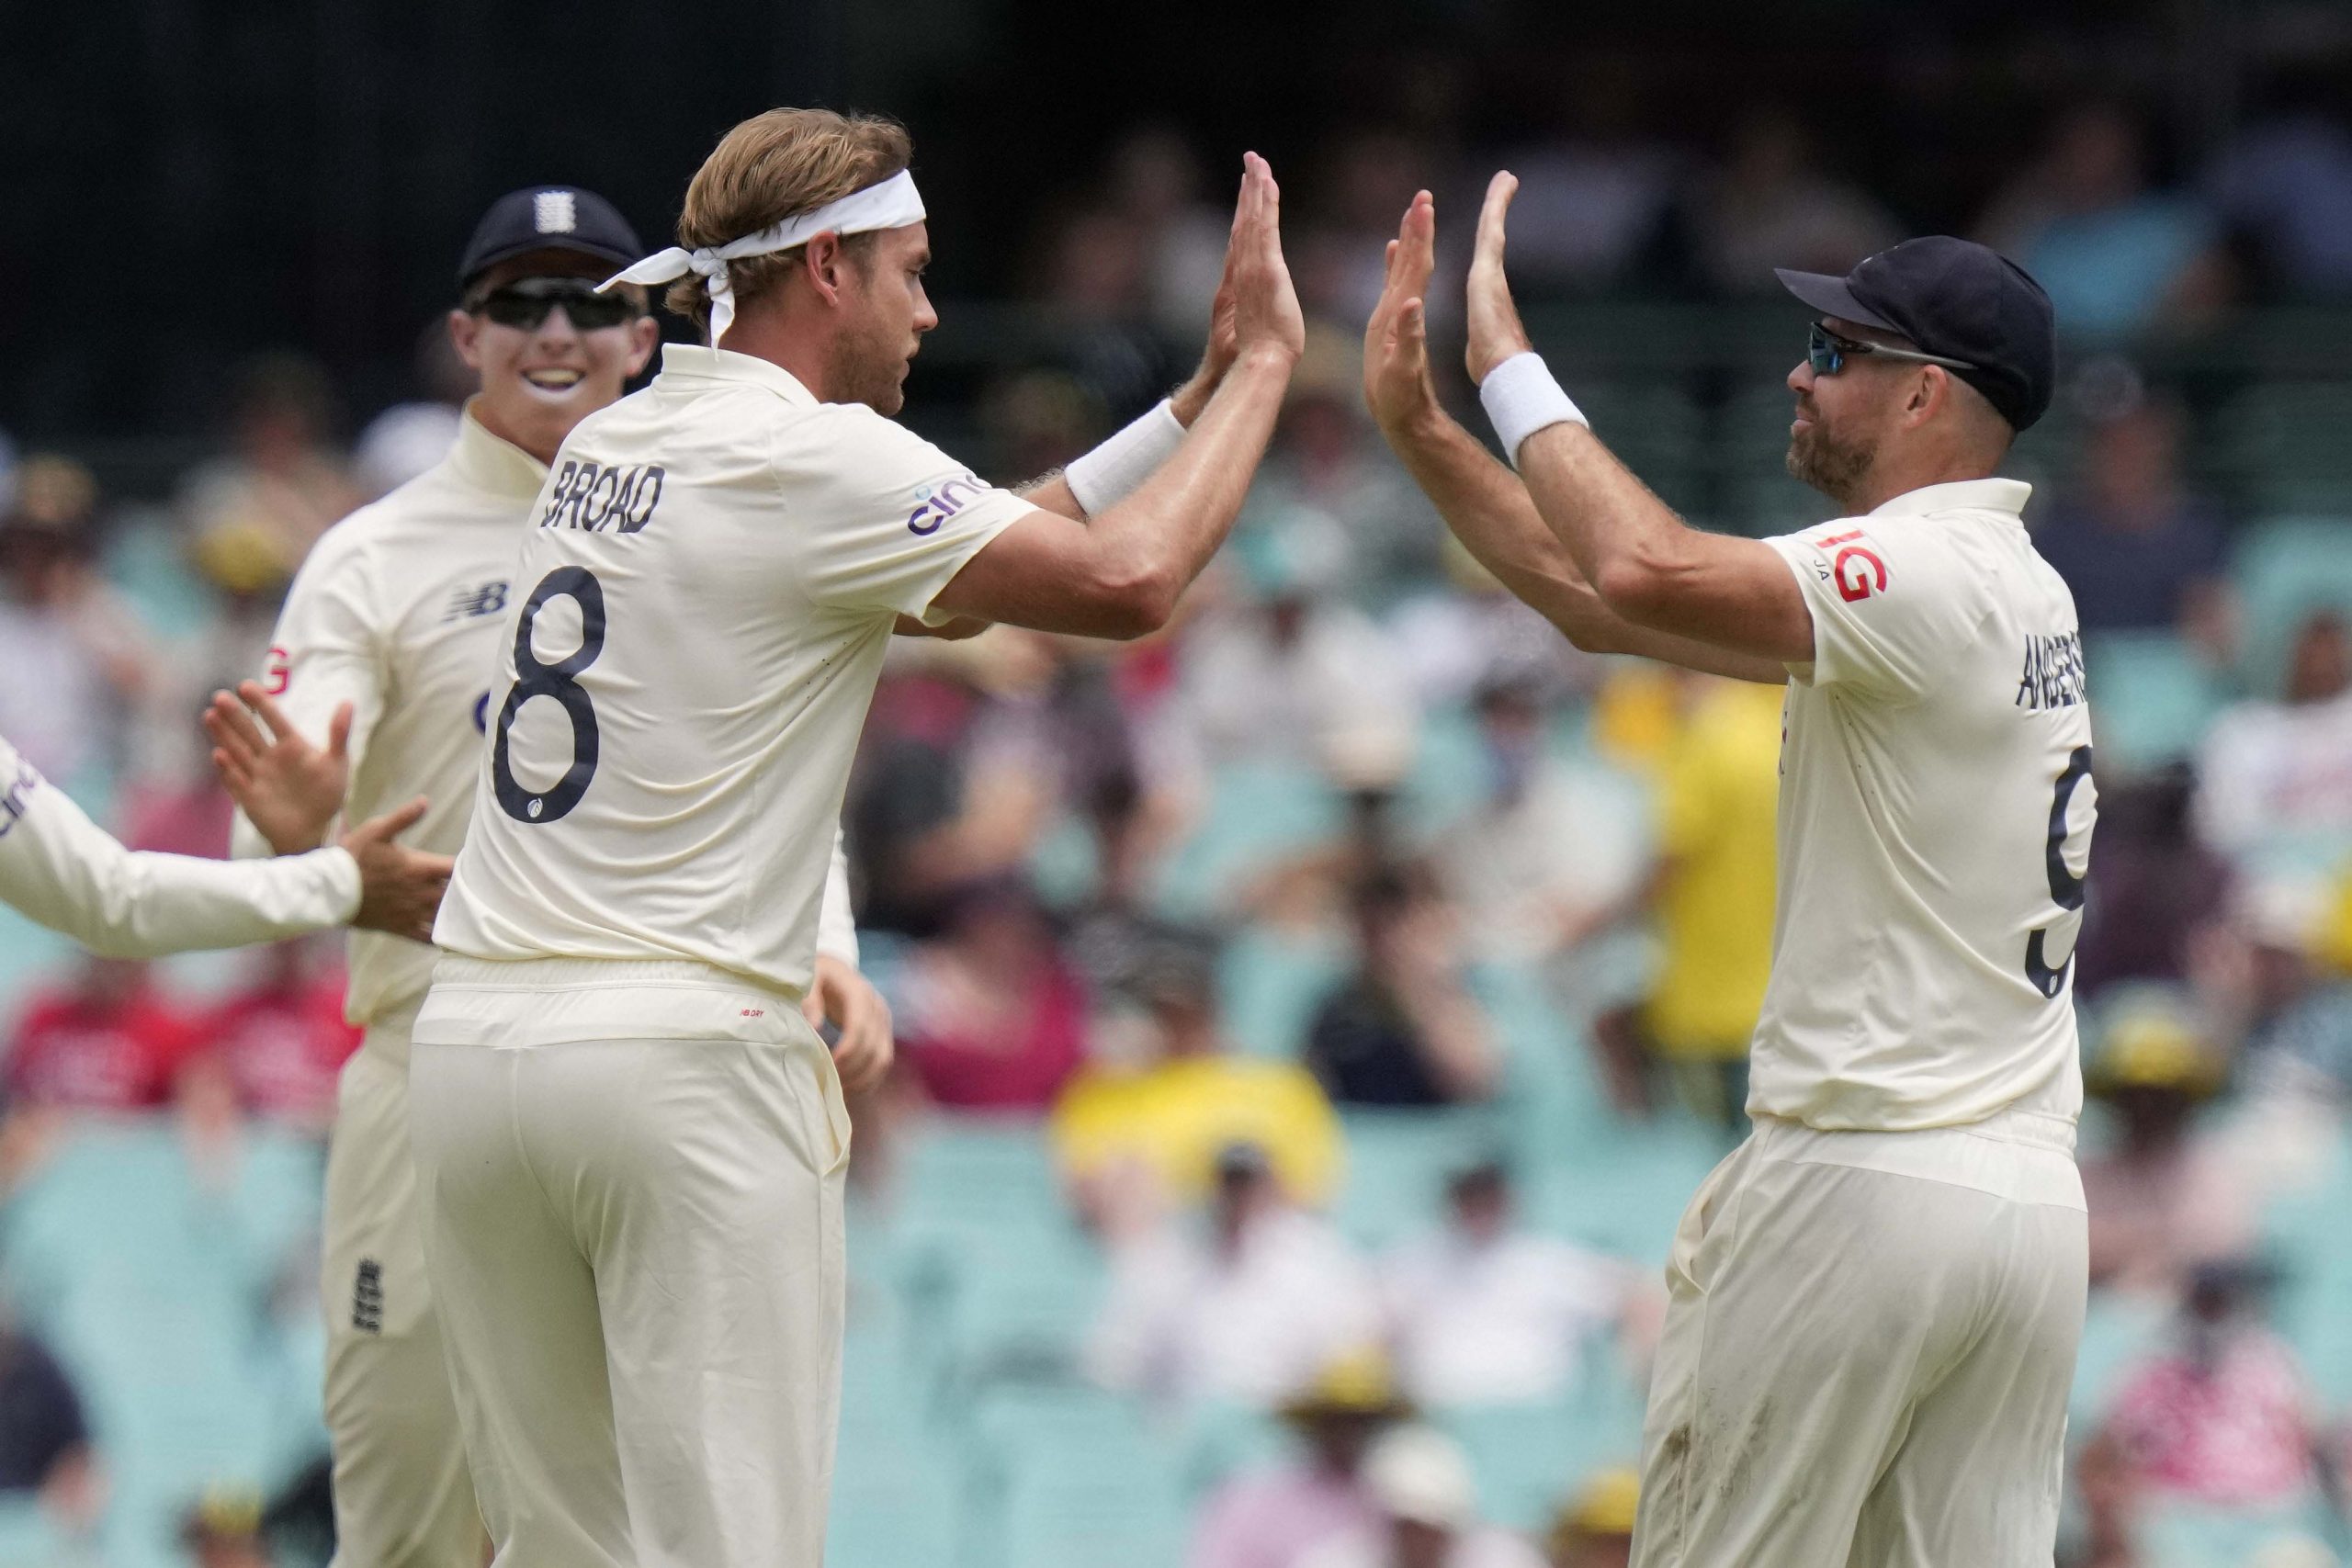 James Anderson, Stuart Broad in: England announce playing 11 for 1st Test vs New Zealand